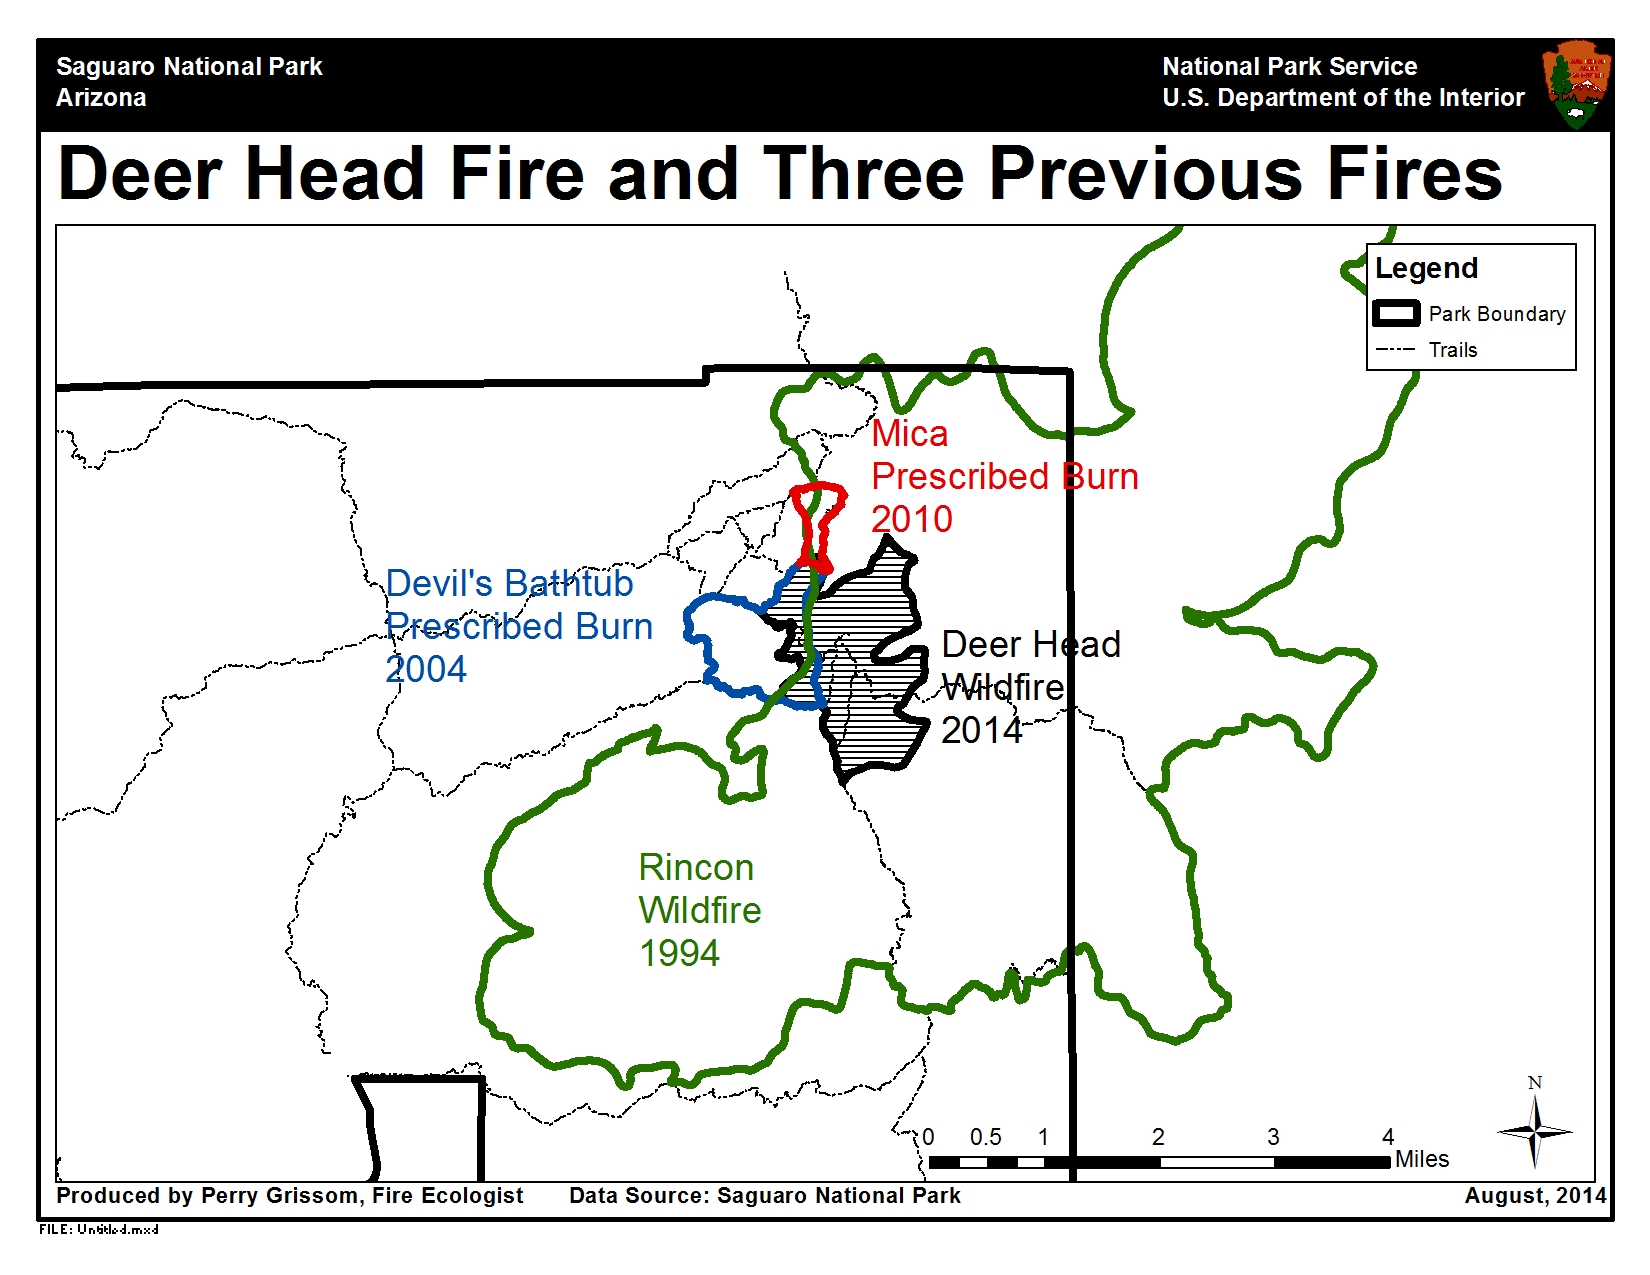 Deer Head Fire and Previous Burns